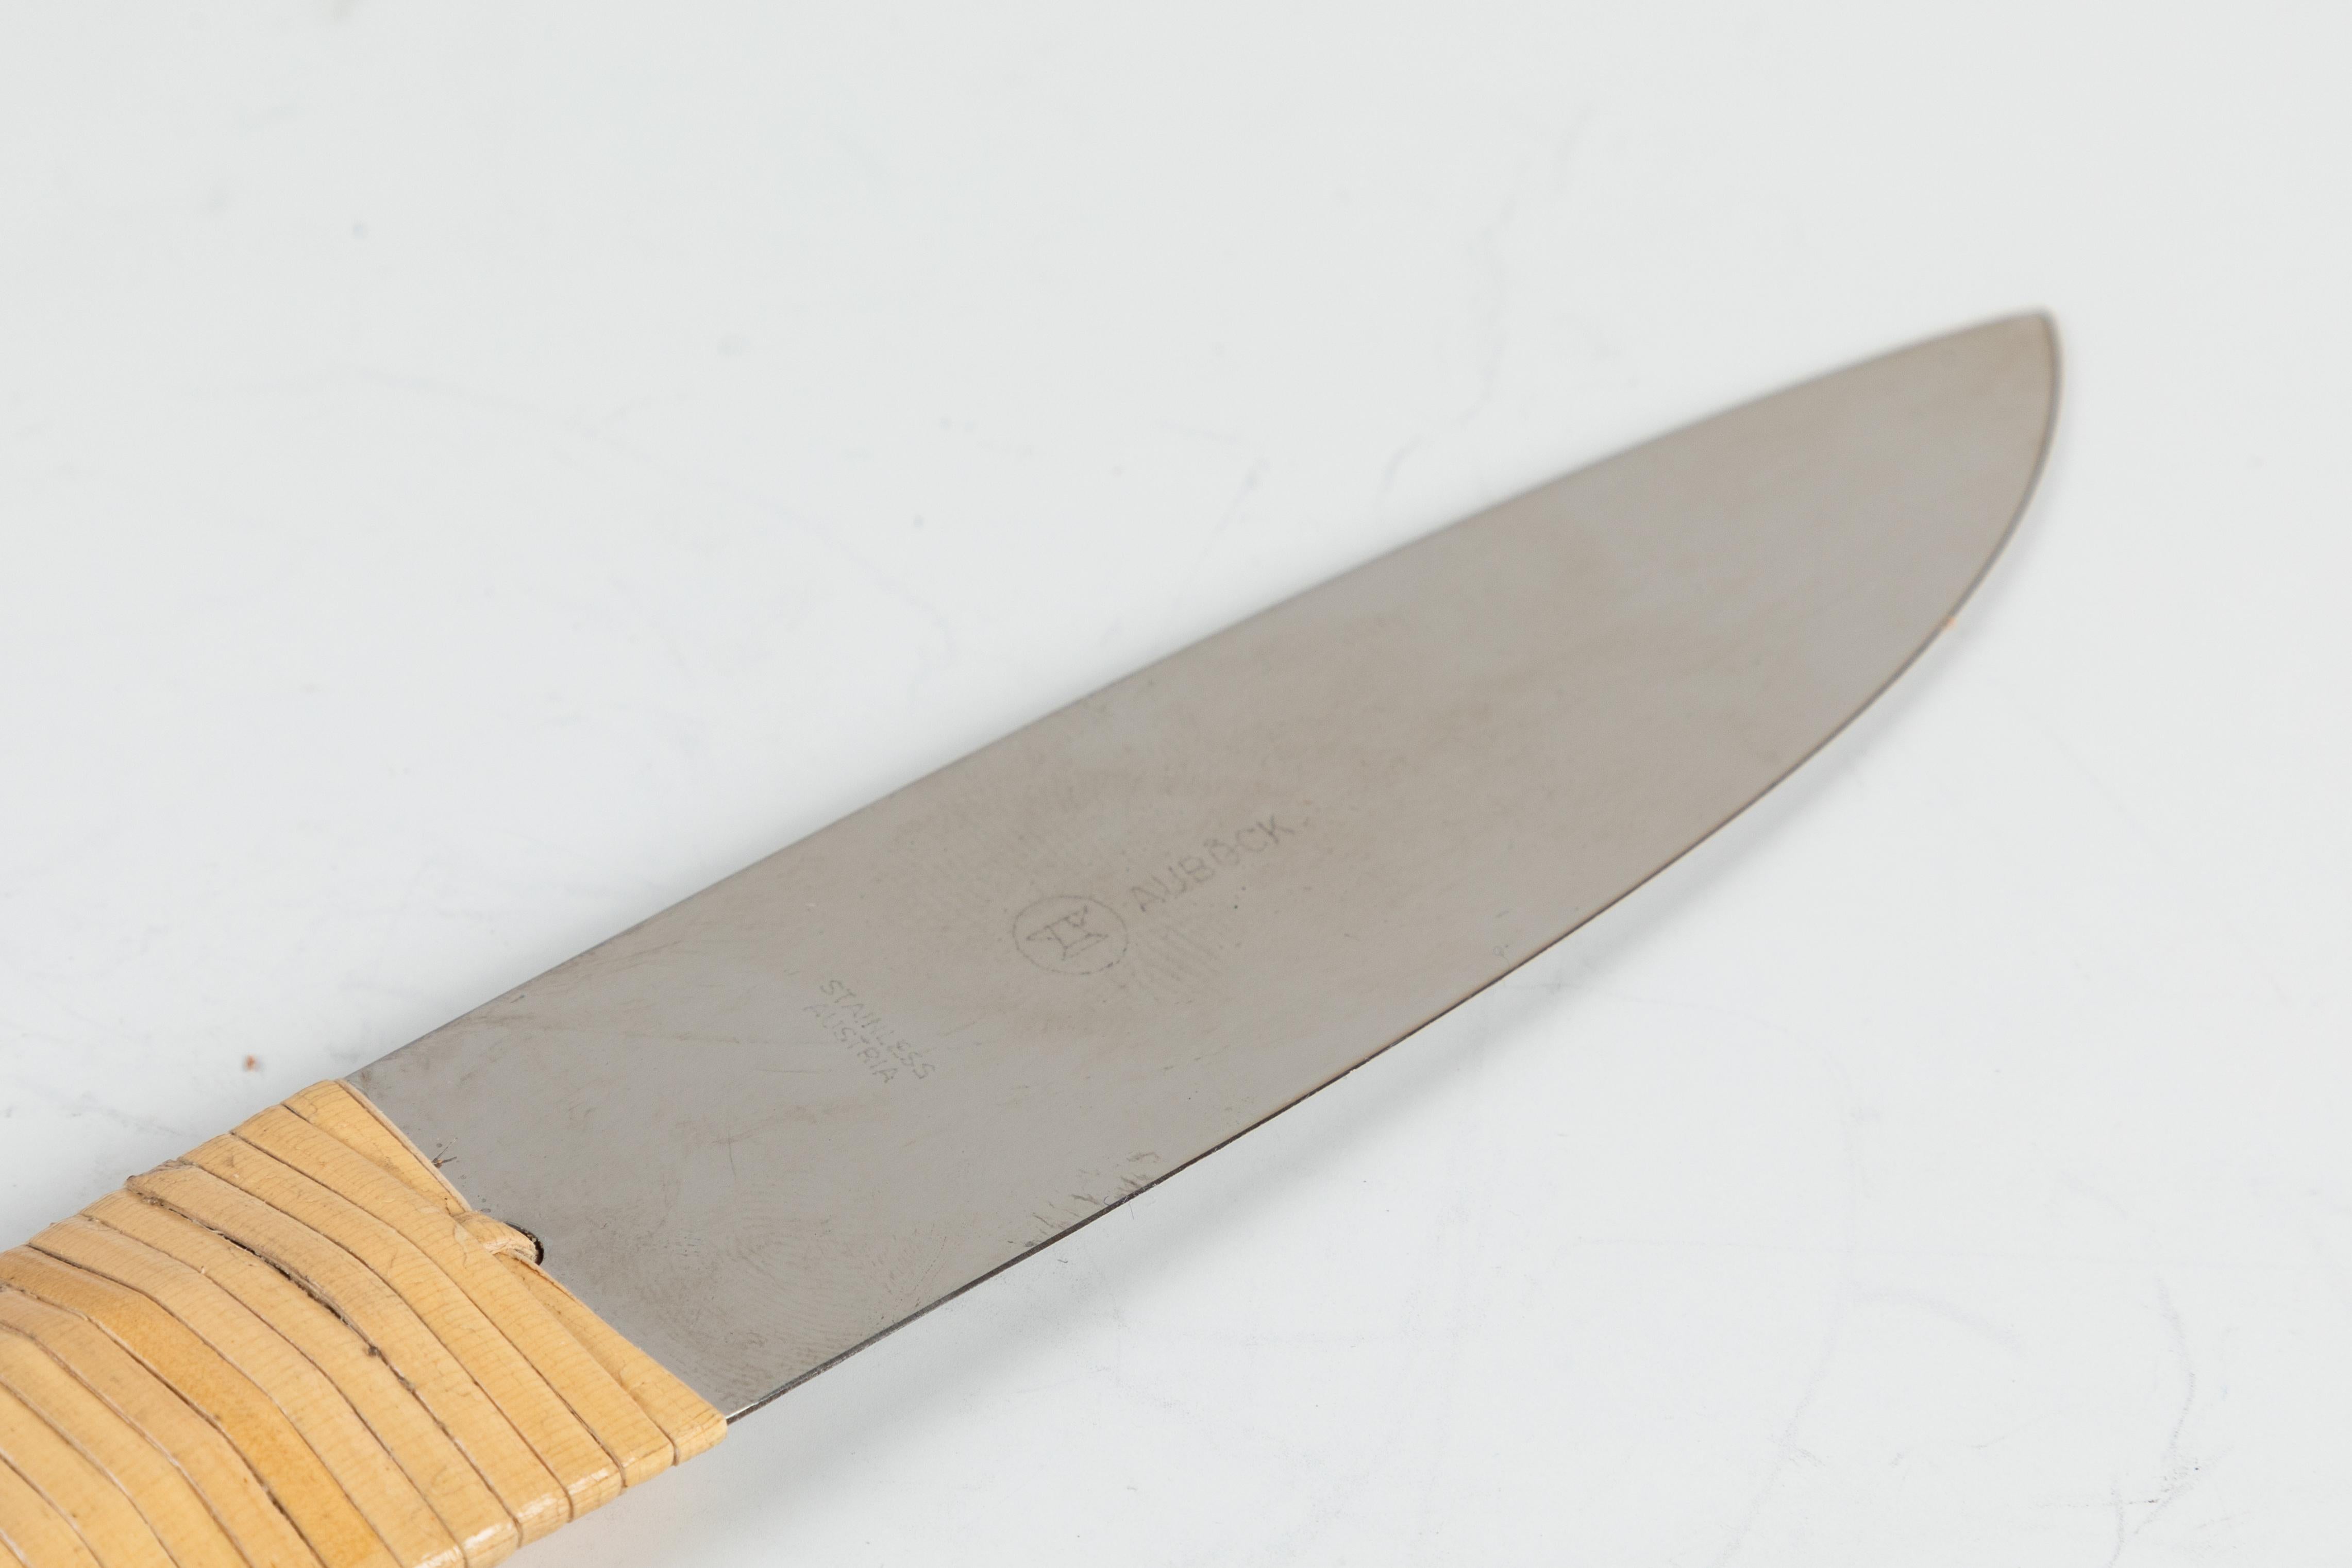 Carl Auböck Model #4828 cane and steel knife. Designed in the 1950s, this incredibly refined and sculptural knife is executed in polished steel and handwoven cane.

Price is per item. This listing is for the knife only. One in stock ready to ship.